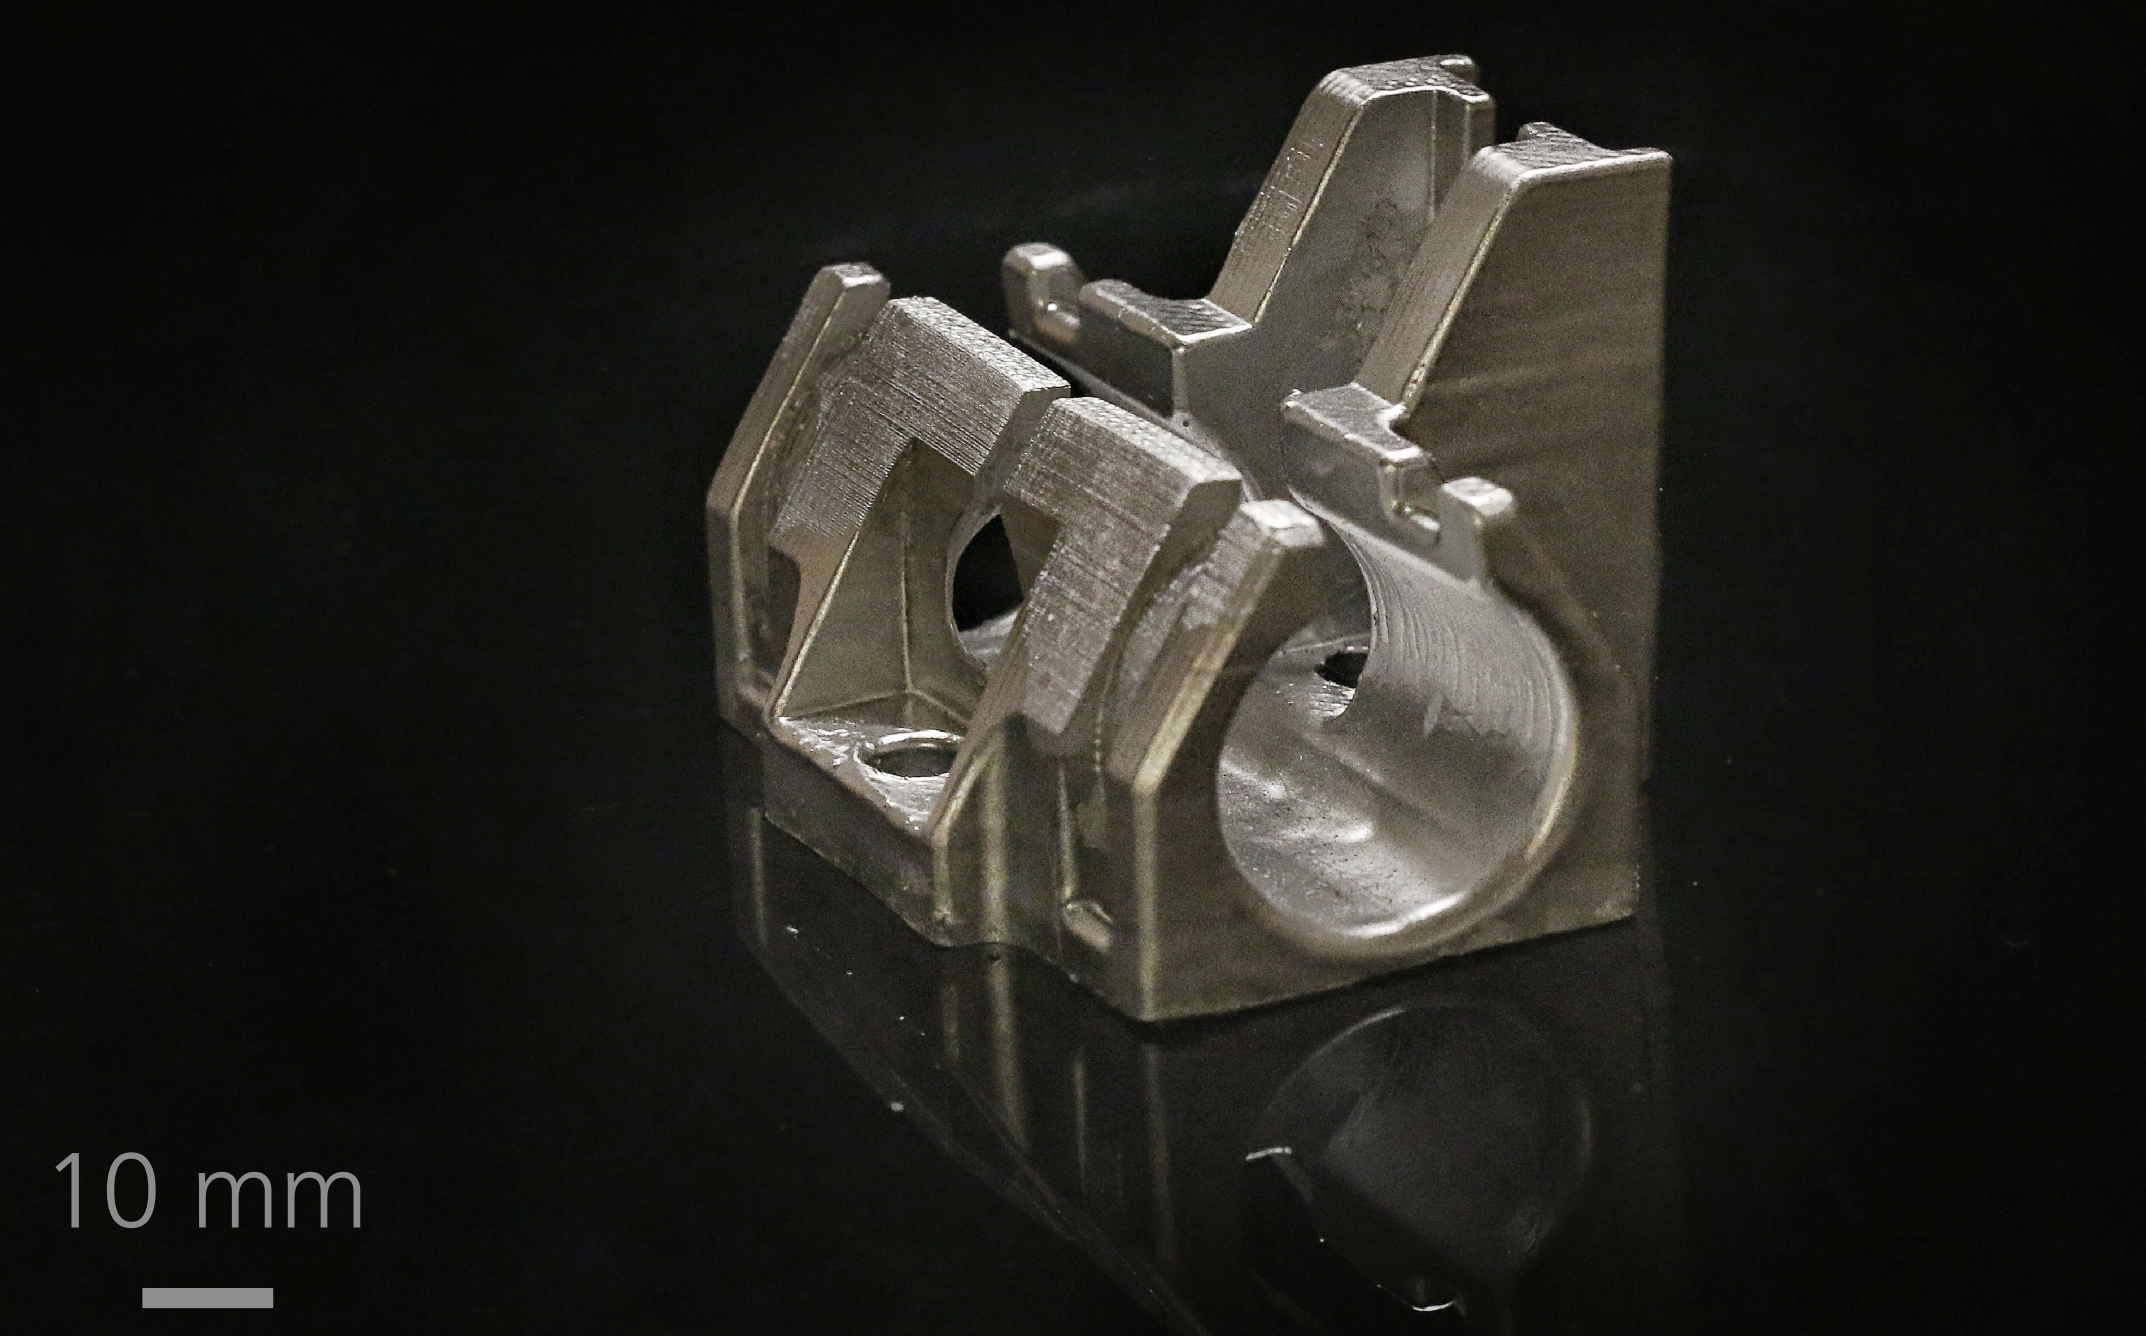 Sled bracket, stainless steel (1.4404). Mold production by means of  FFF.